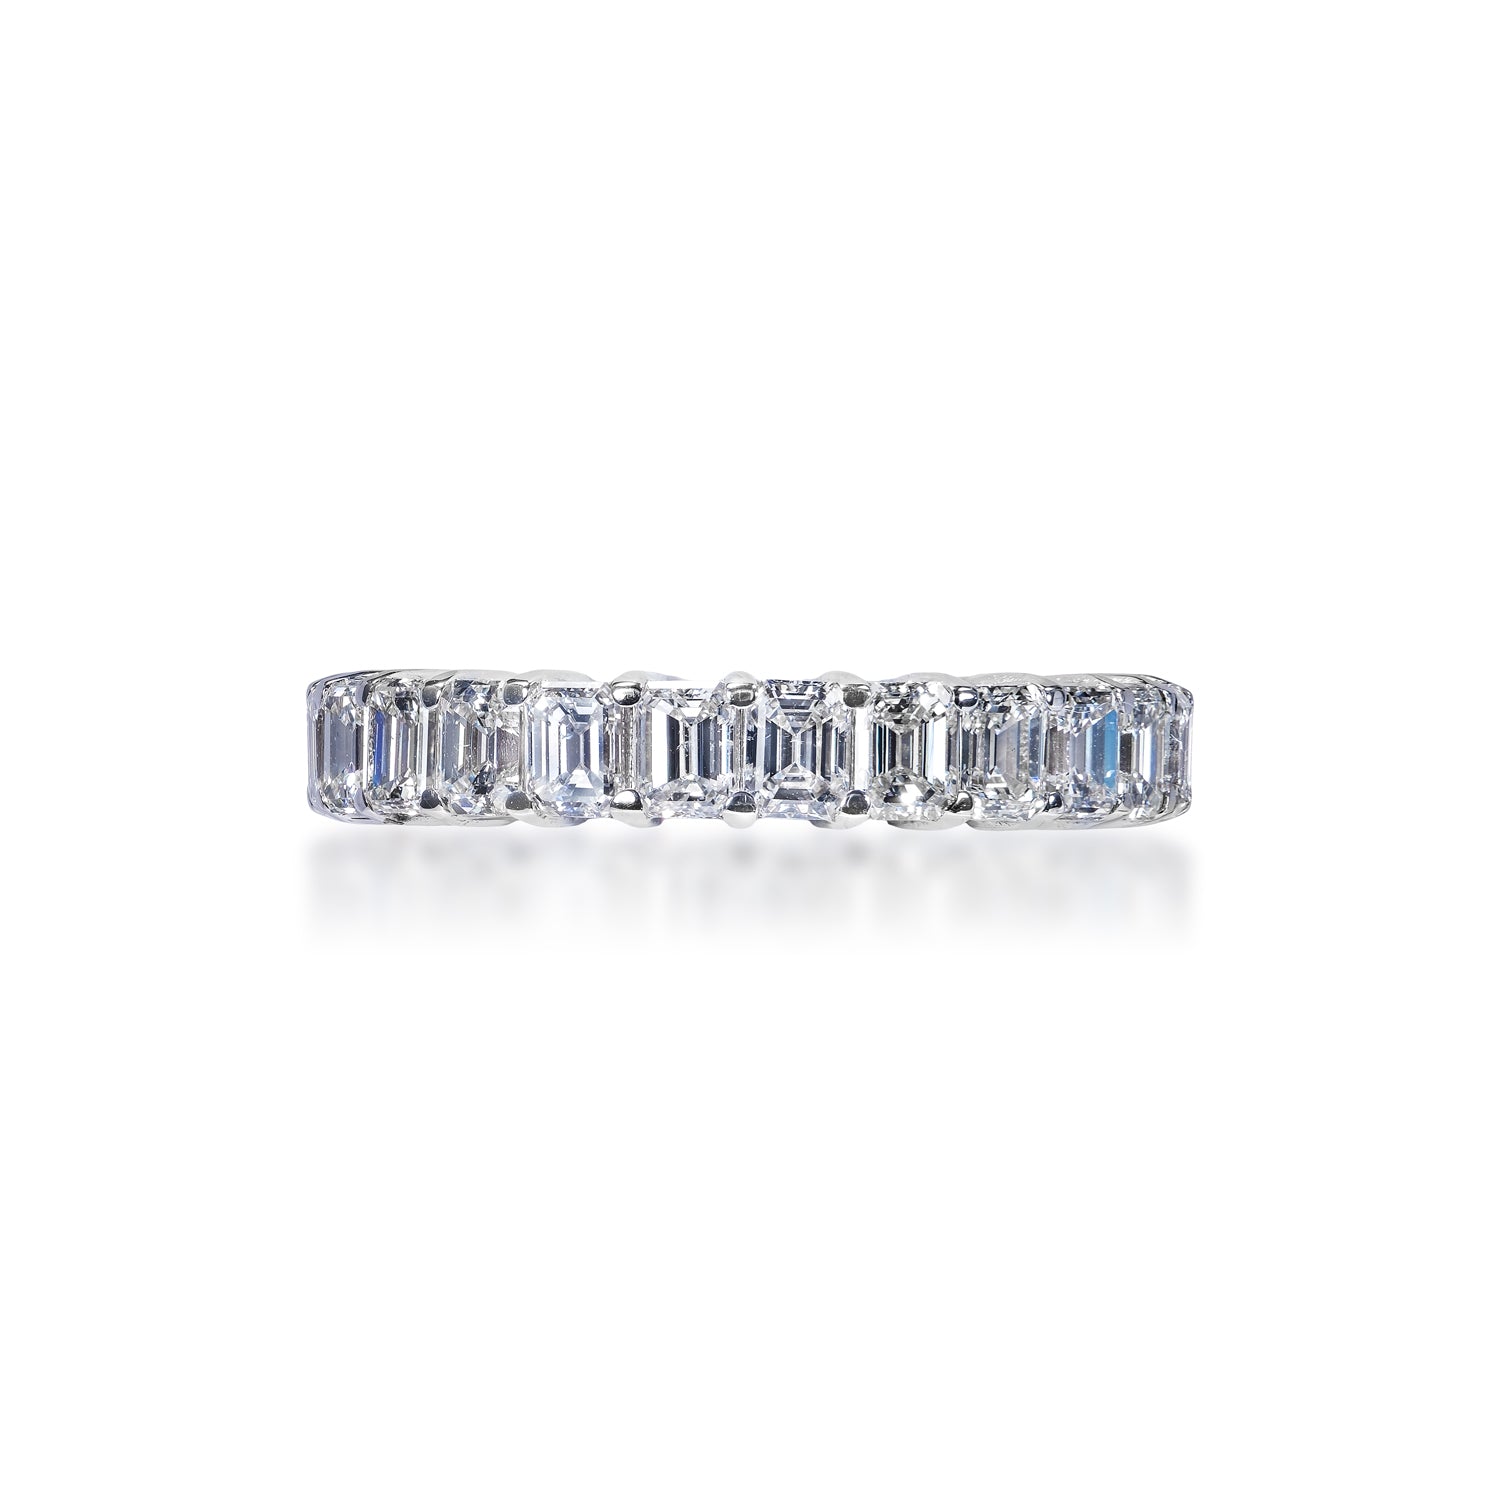 Brinley 4 Carat Emerald Cut Diamond Eternity Band in 14k White Gold Shared Prong Front View